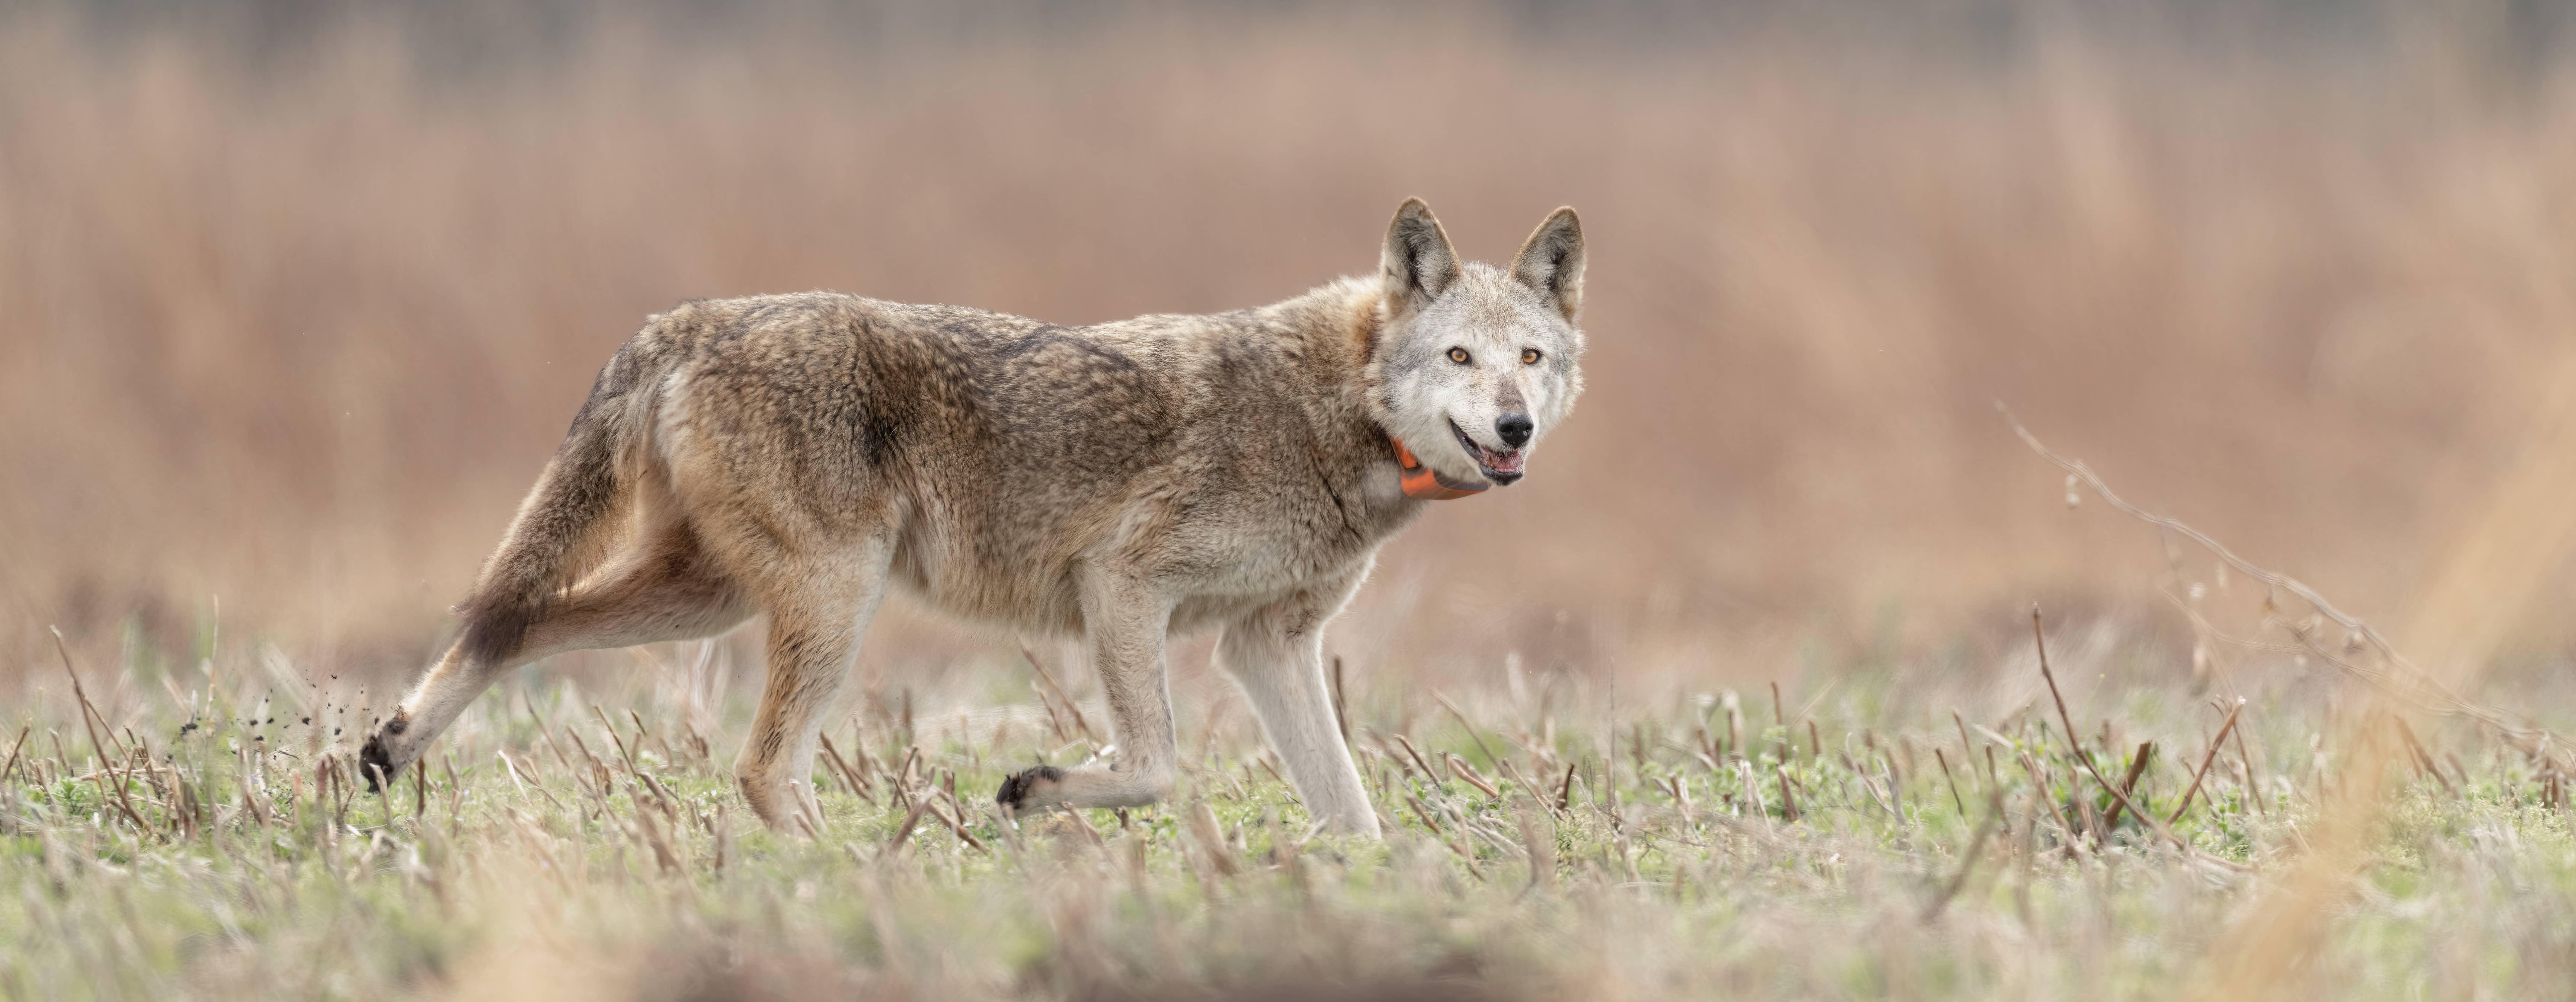 A red wolf runs through a field in early morning light. The wolf is wearing an orange radio tracking collar and has fur that is a mix of reddish browns and pale silver. It looks like fall, the crops in the field have died and been cut short.